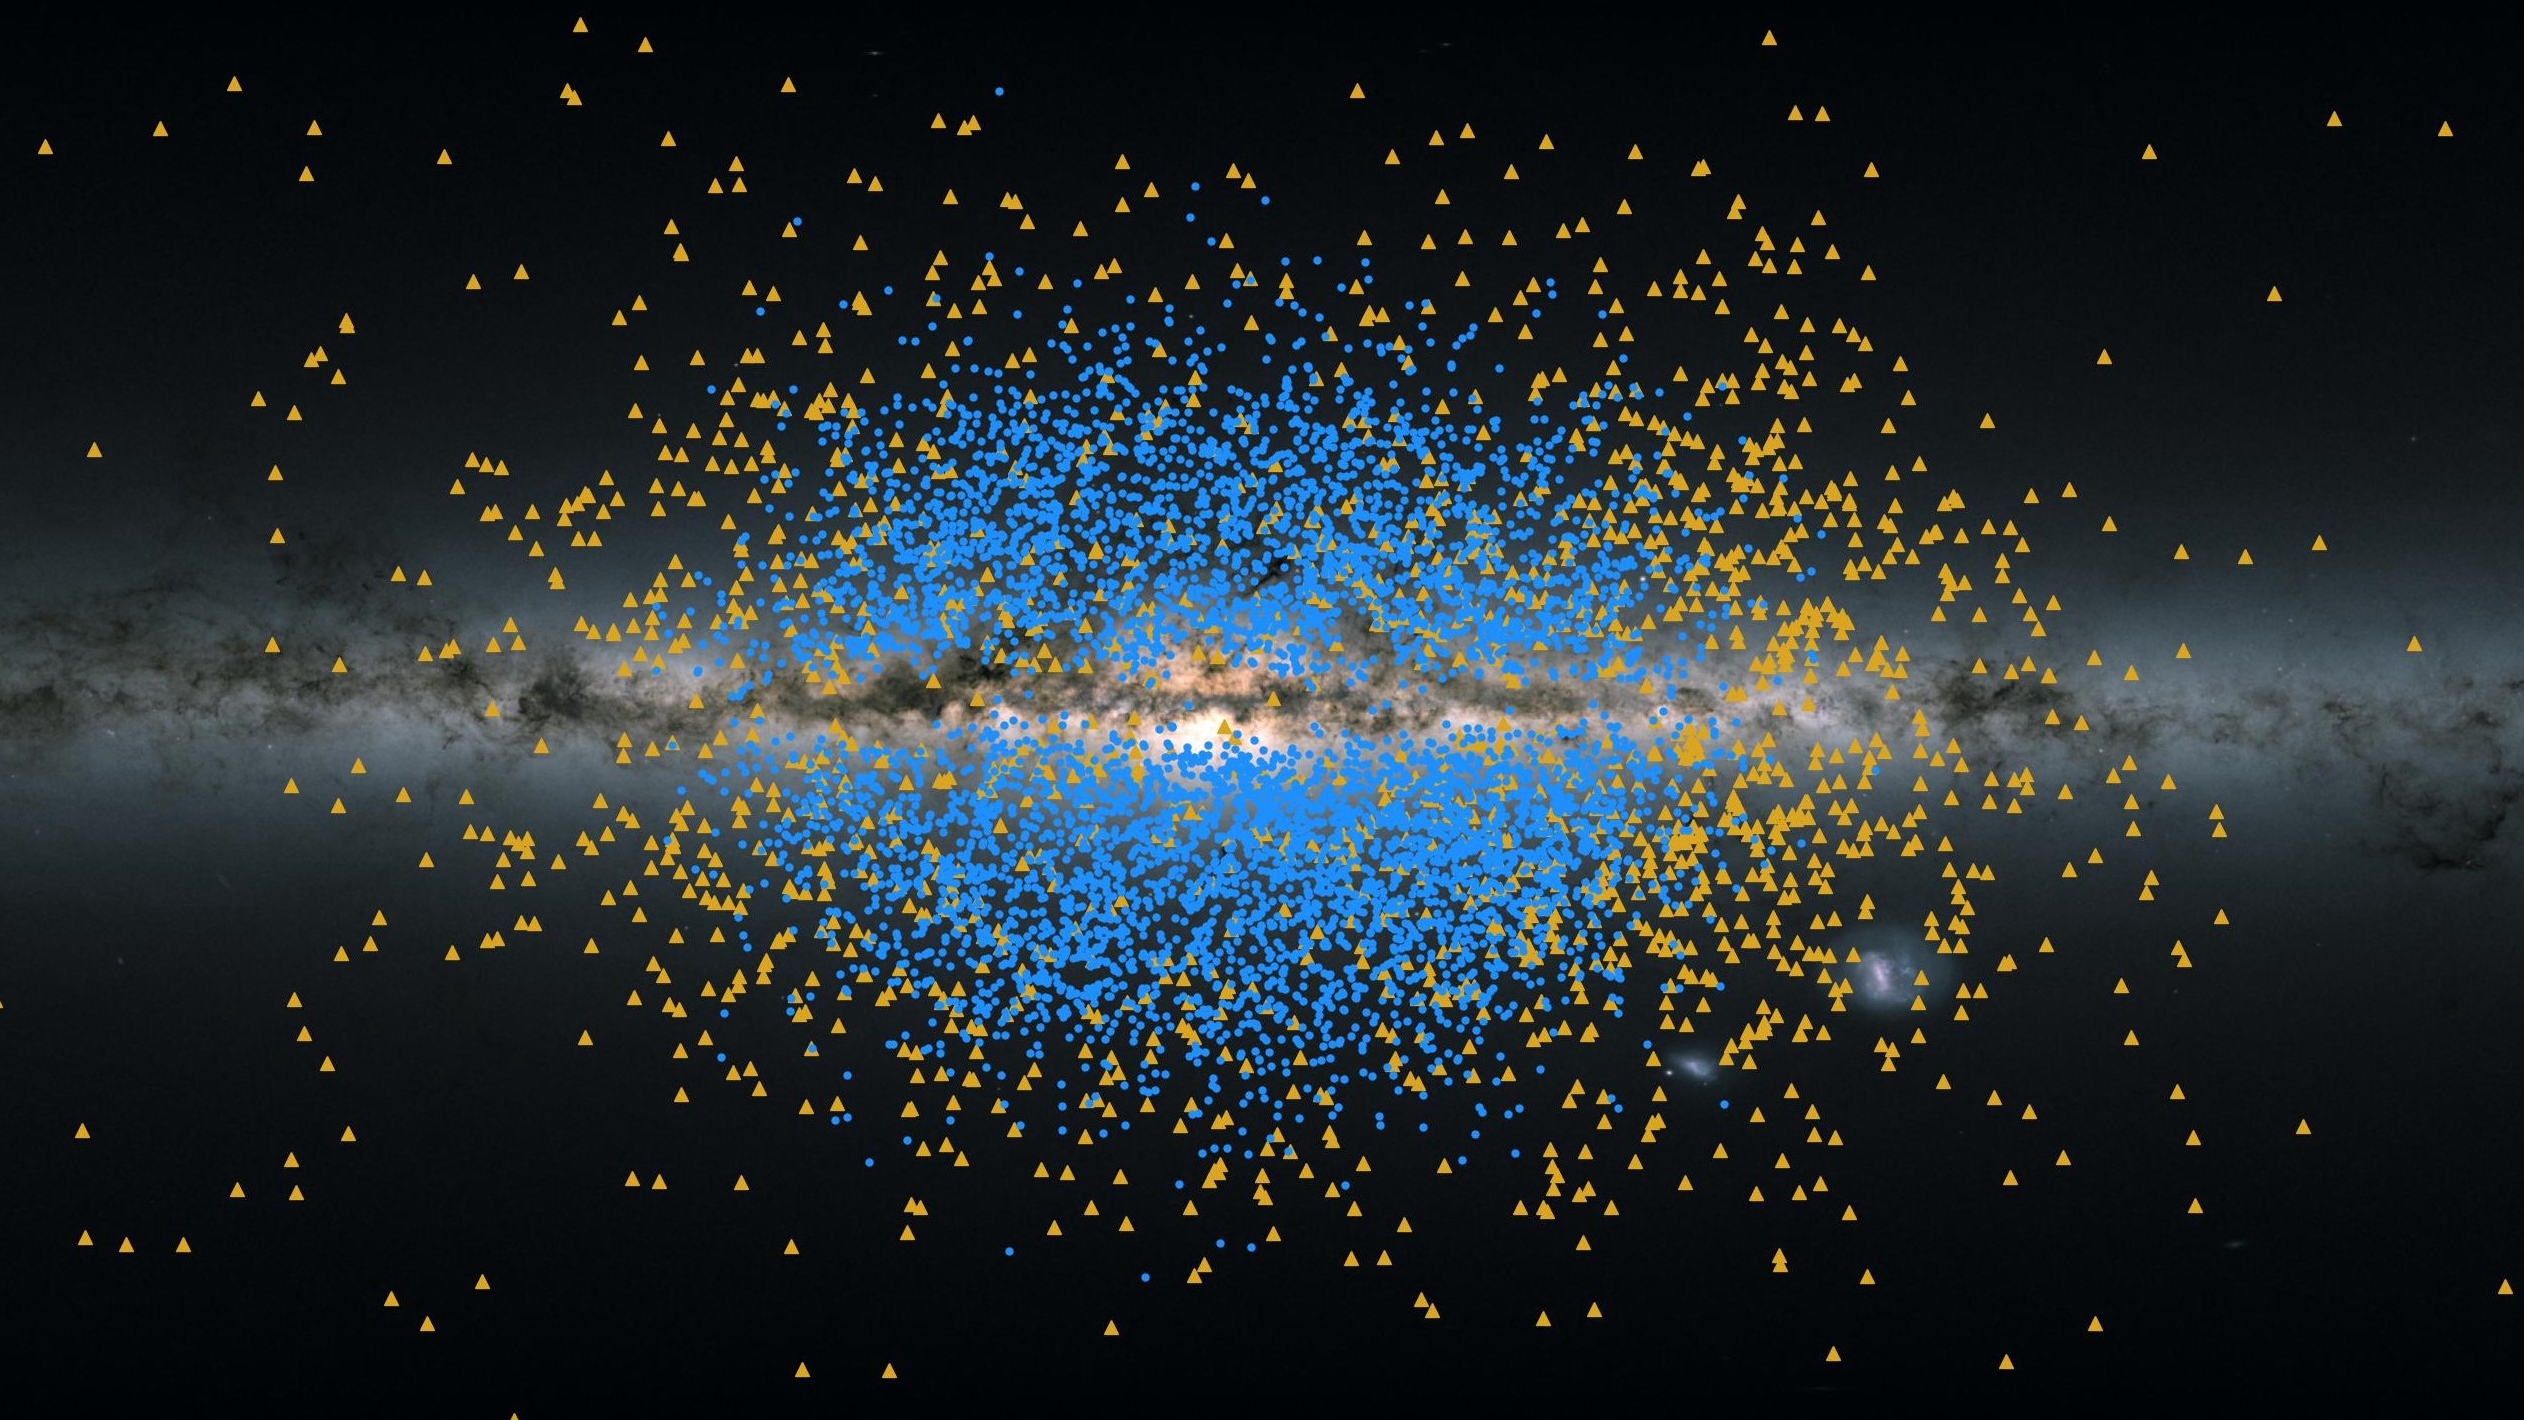 European Space Agency's astrometry satellite Gaia unravels two ancient streams of stars in the Milky Way. /ESA